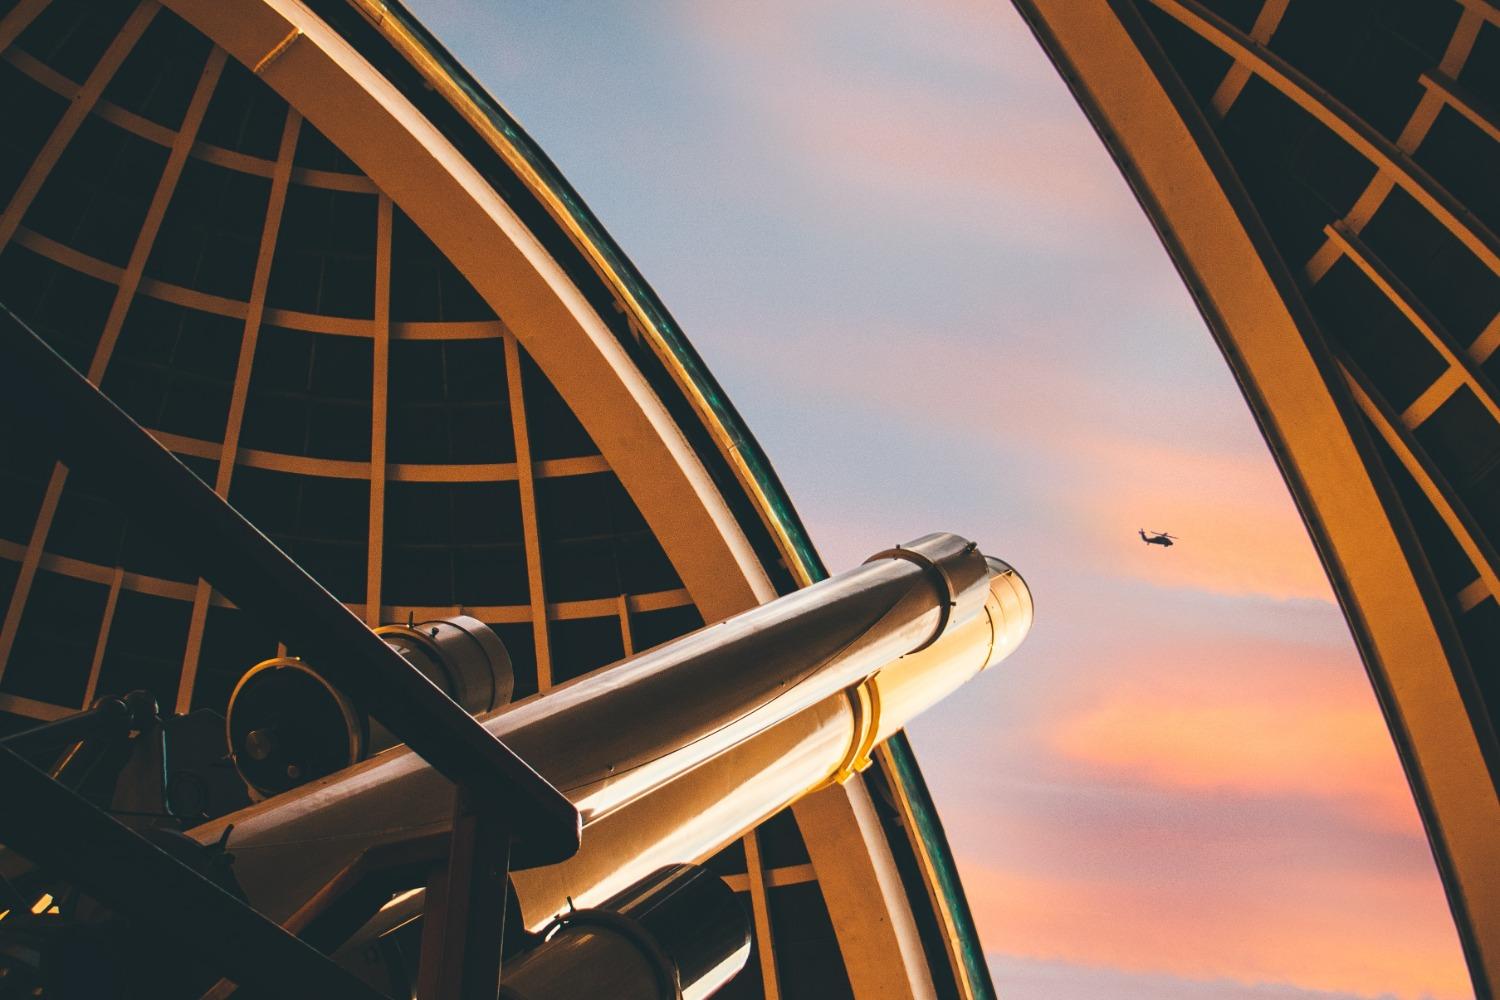 A telescope at sunset